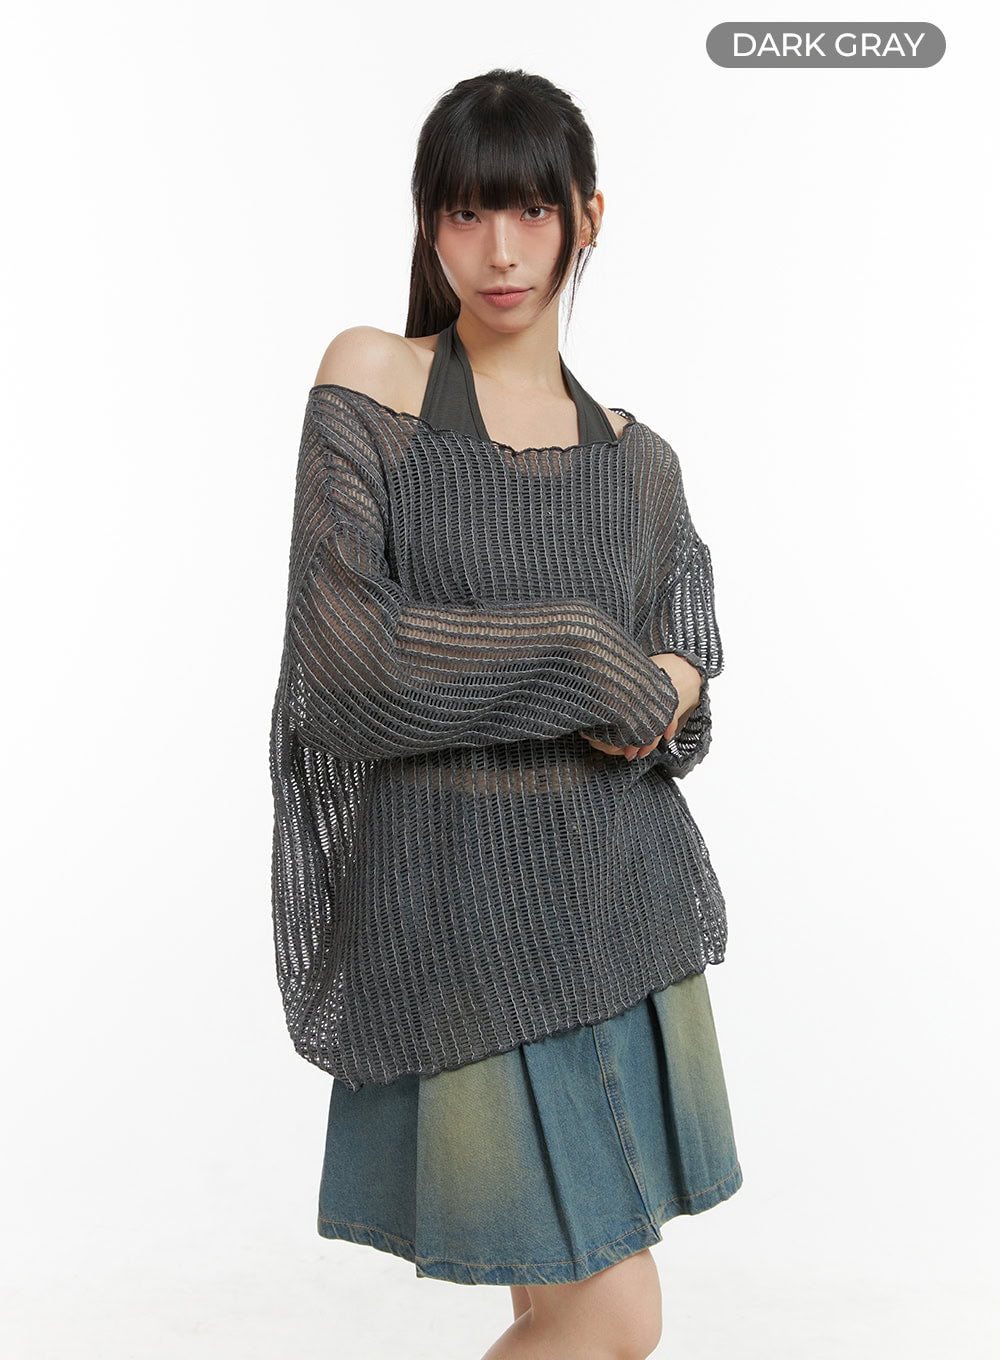 oversize-hollow-out-one-shoulder-knit-sweater-cl422 / Dark gray